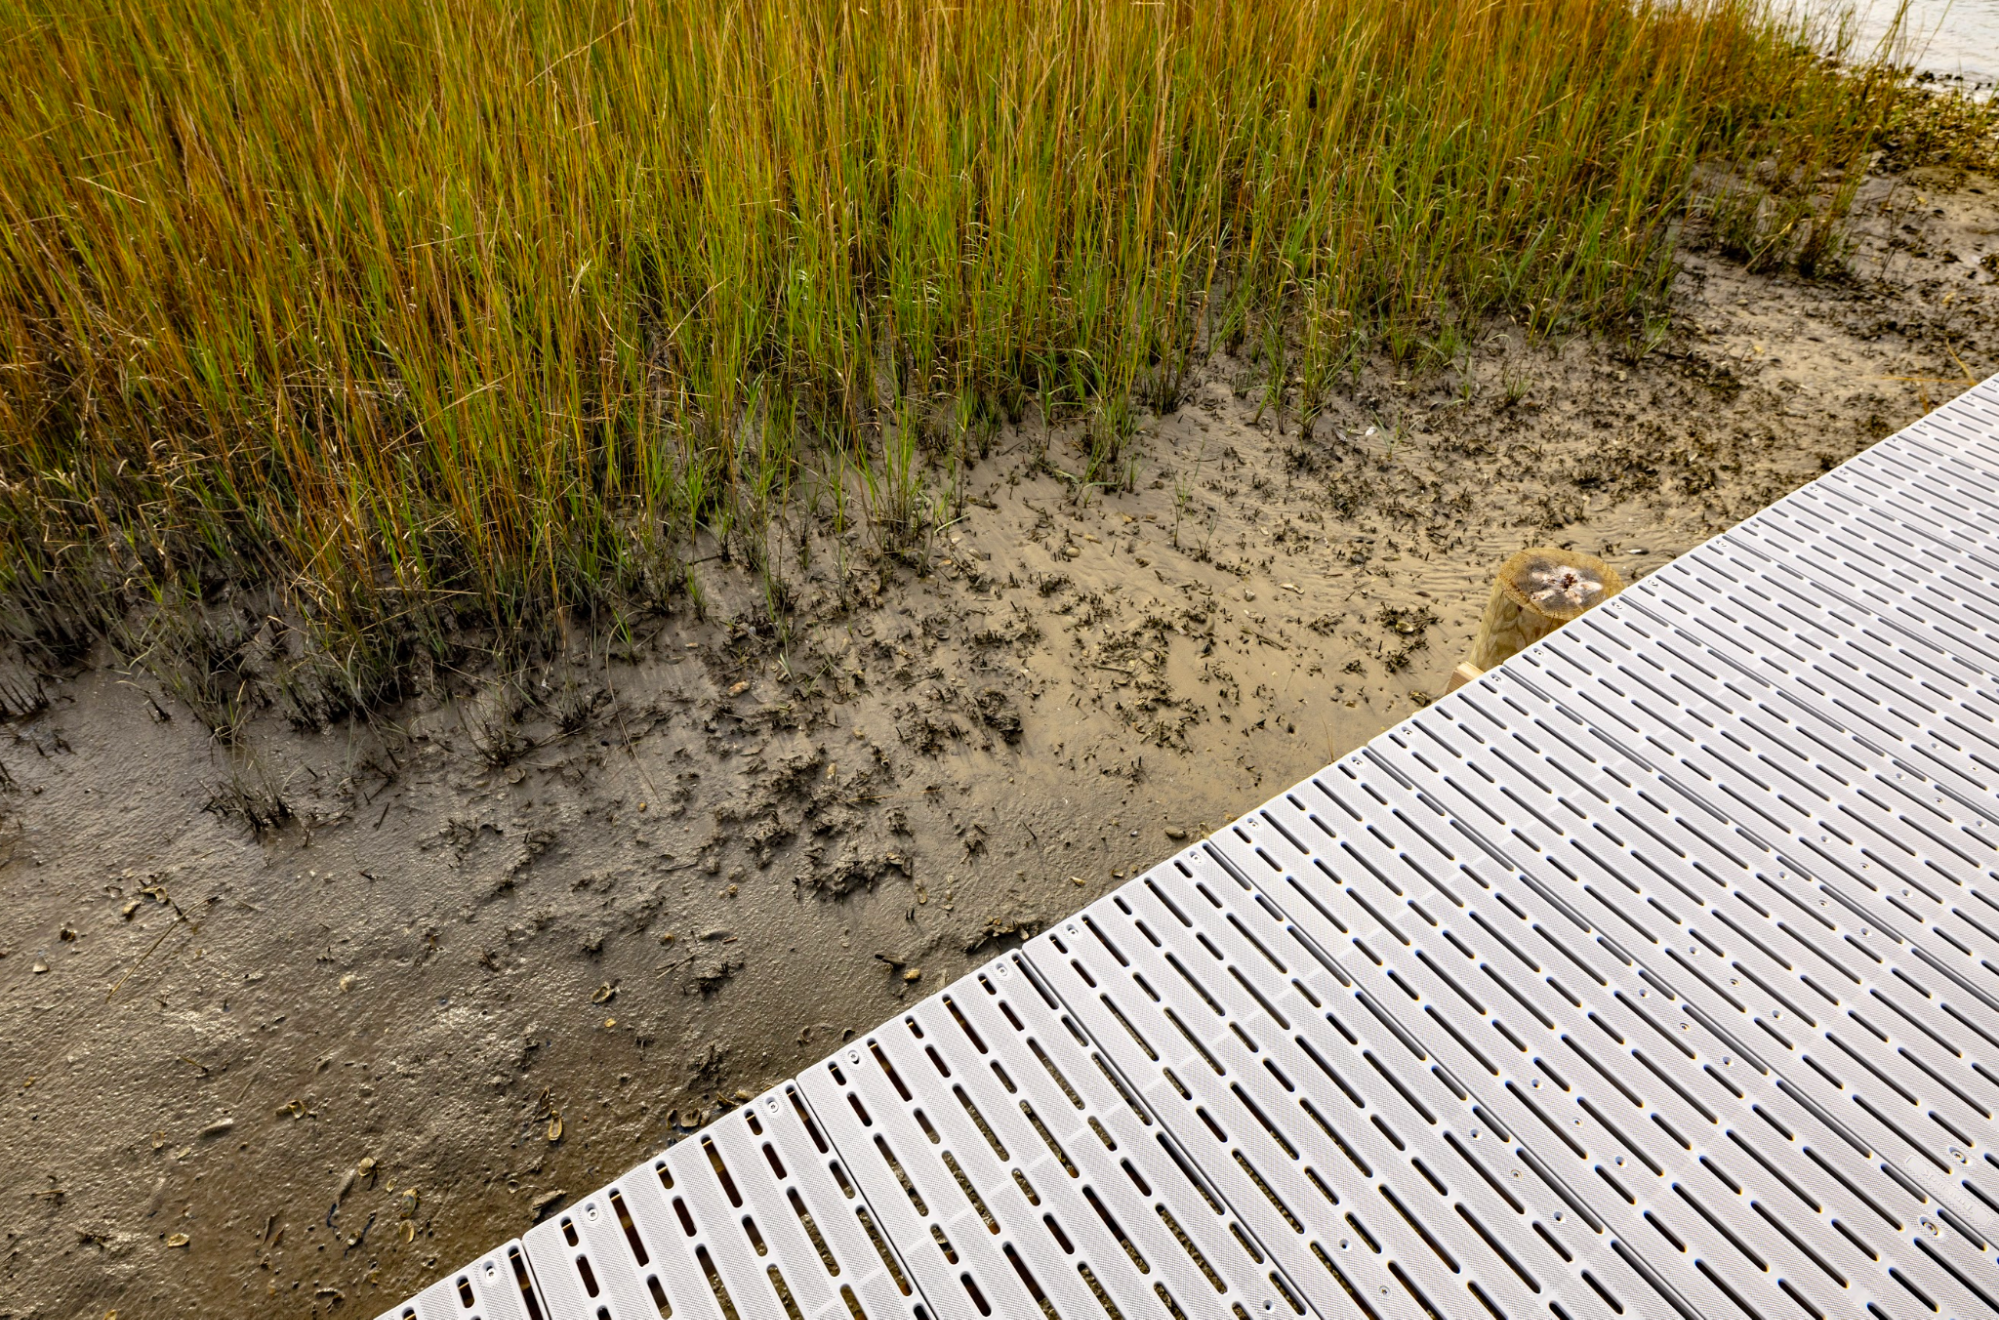 This is a view of the shoreline featuring a dock made from Titan Deck materials, which allows sunlight to come through its grid profile. The shore’s environment features grass and other vegetation. 